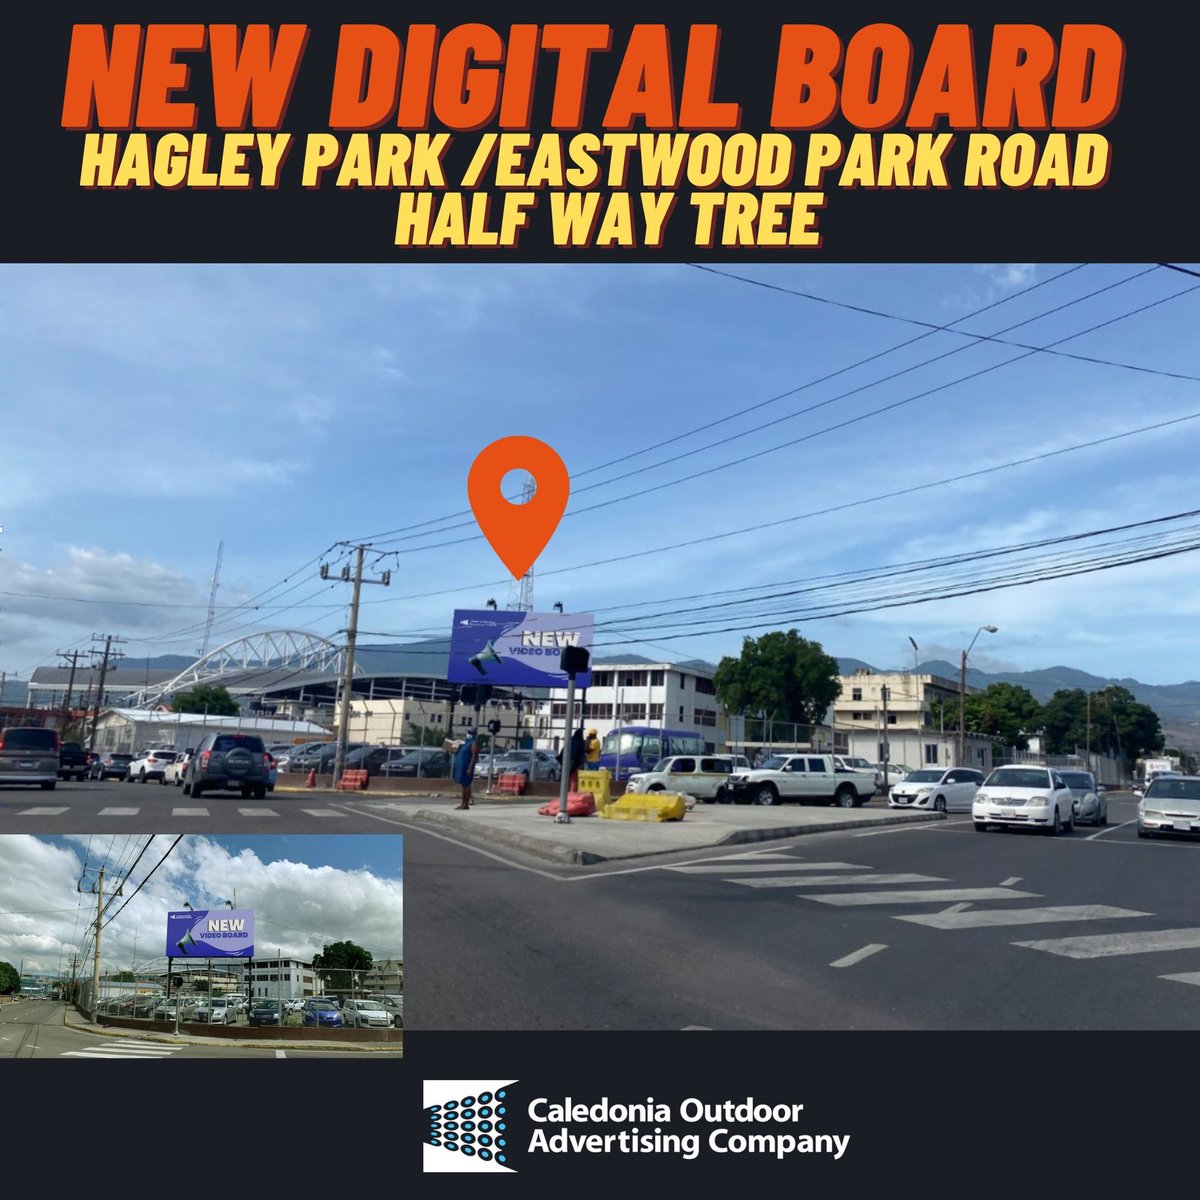 NEW! Coming Soon! Call TODAY #digitalboards #ooh #Caledonia